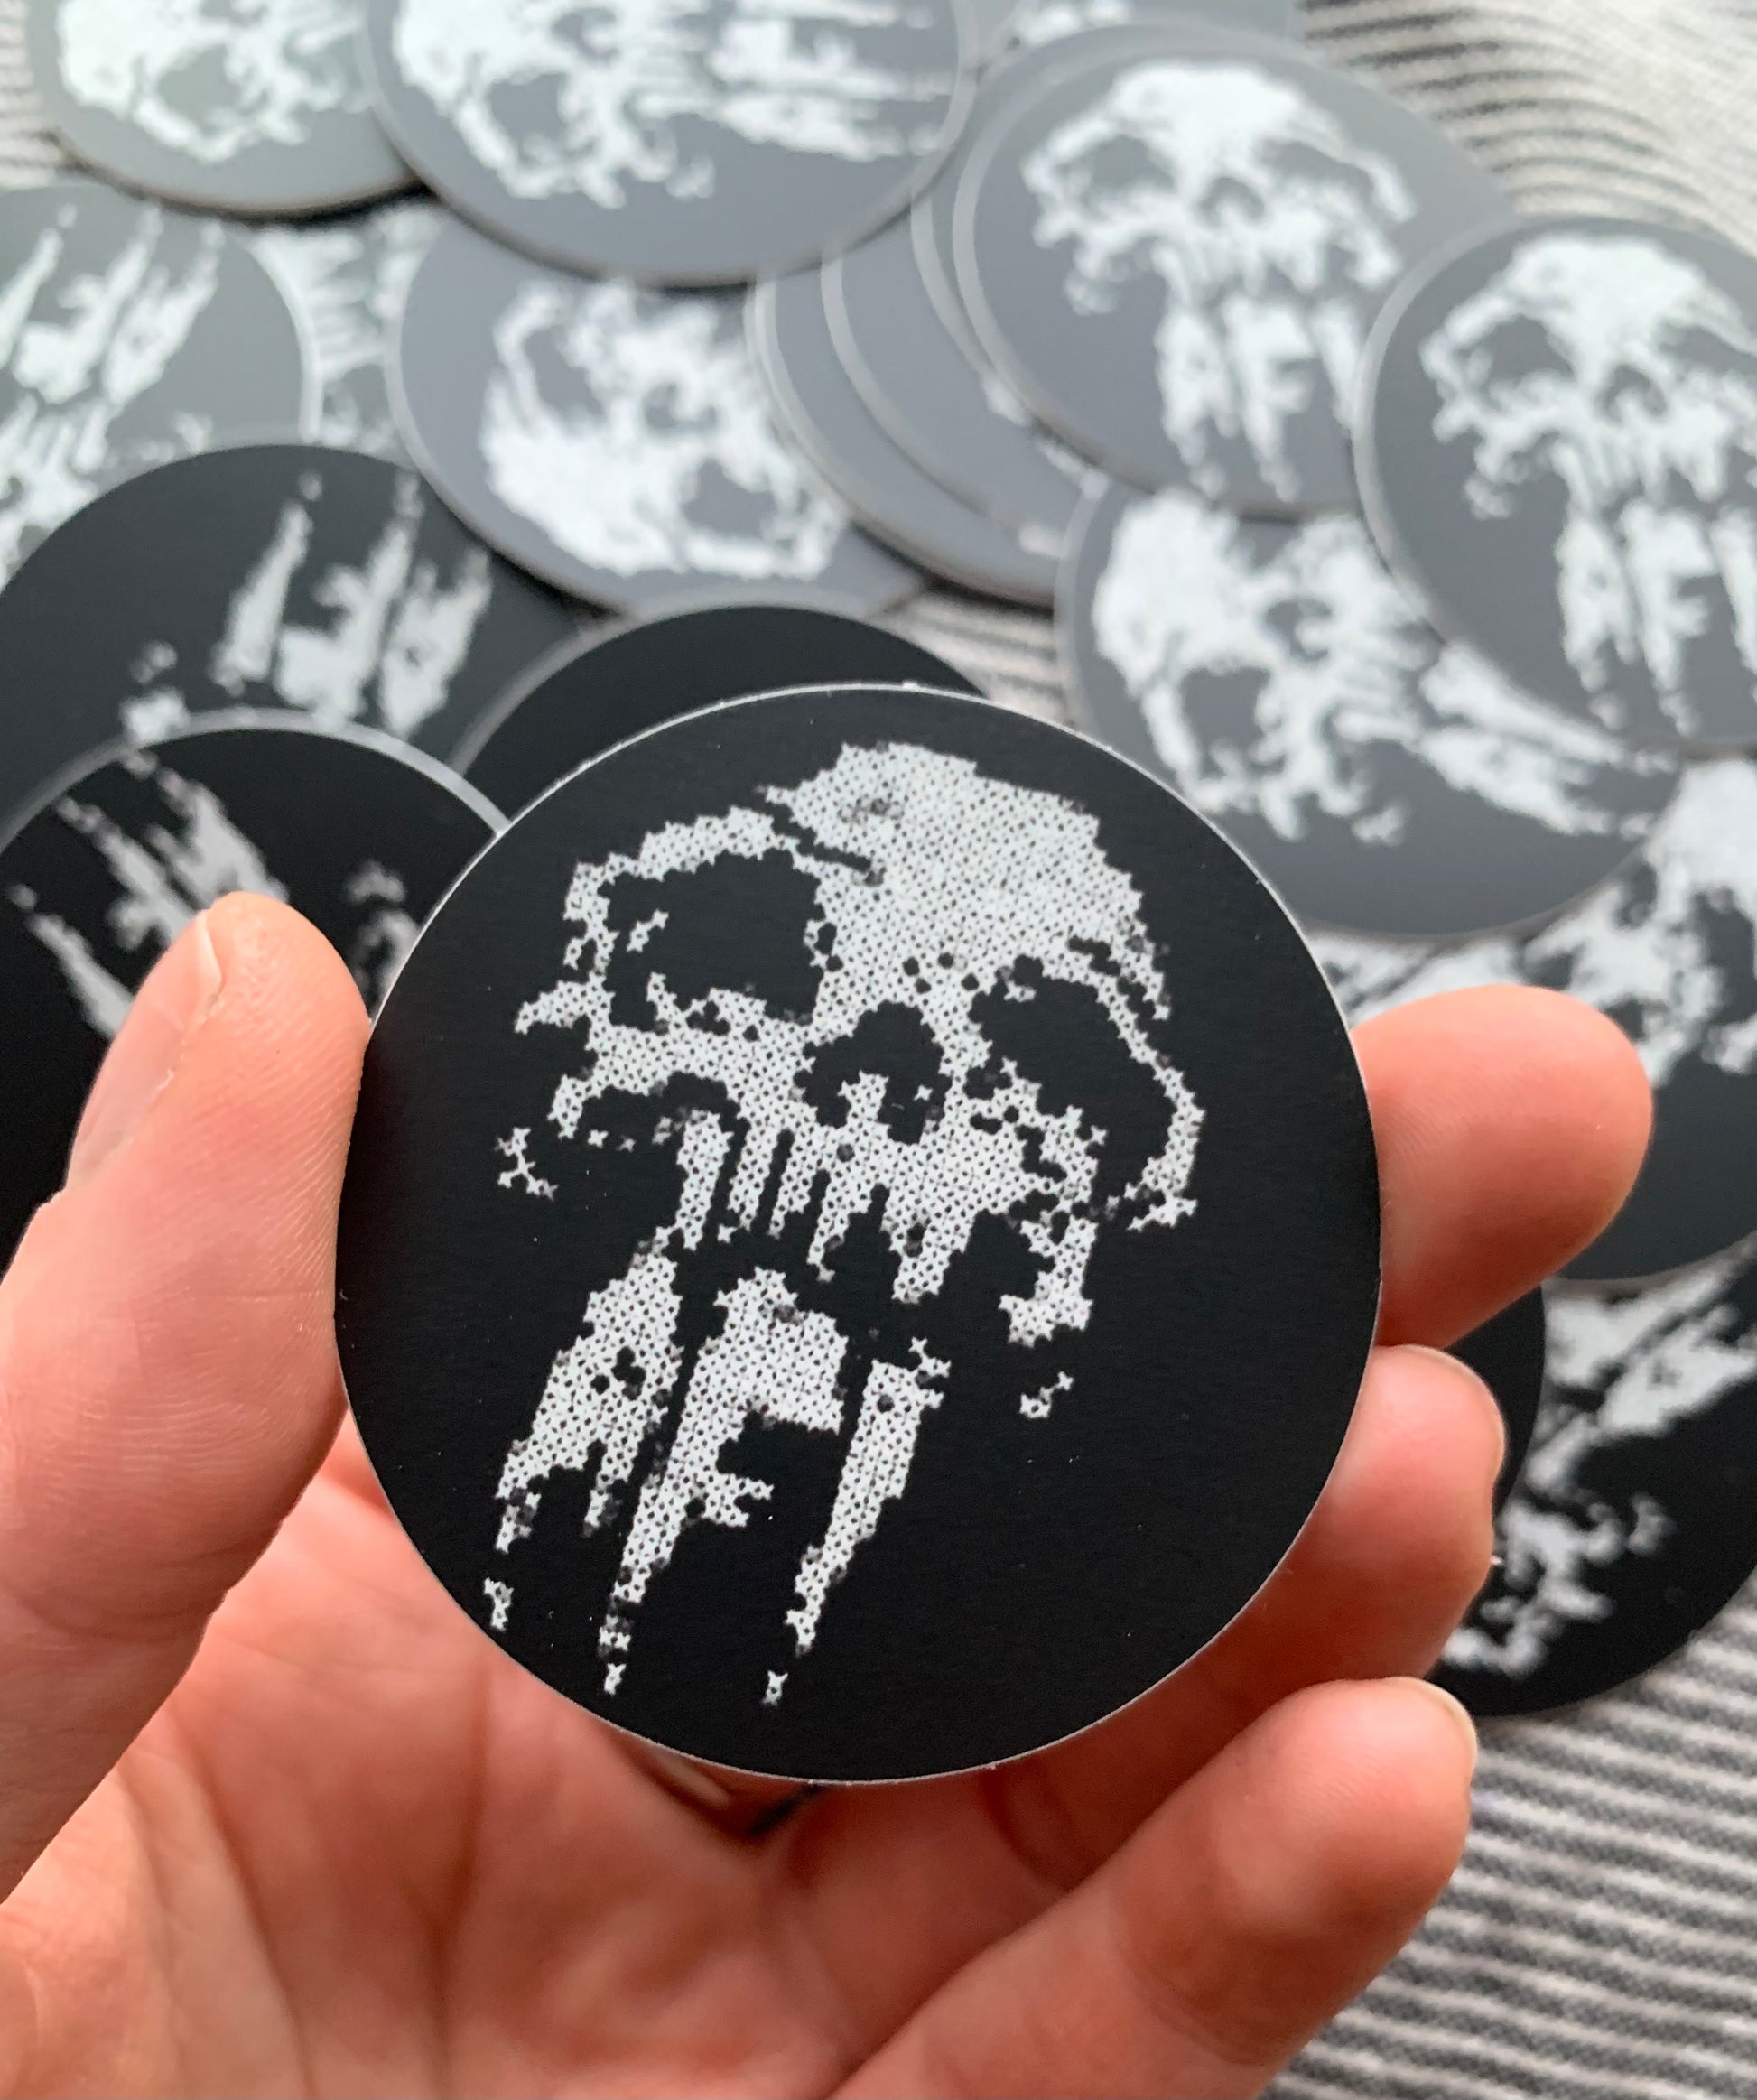 AFi skull design sticker, created from my embroidery, in a hand for scale